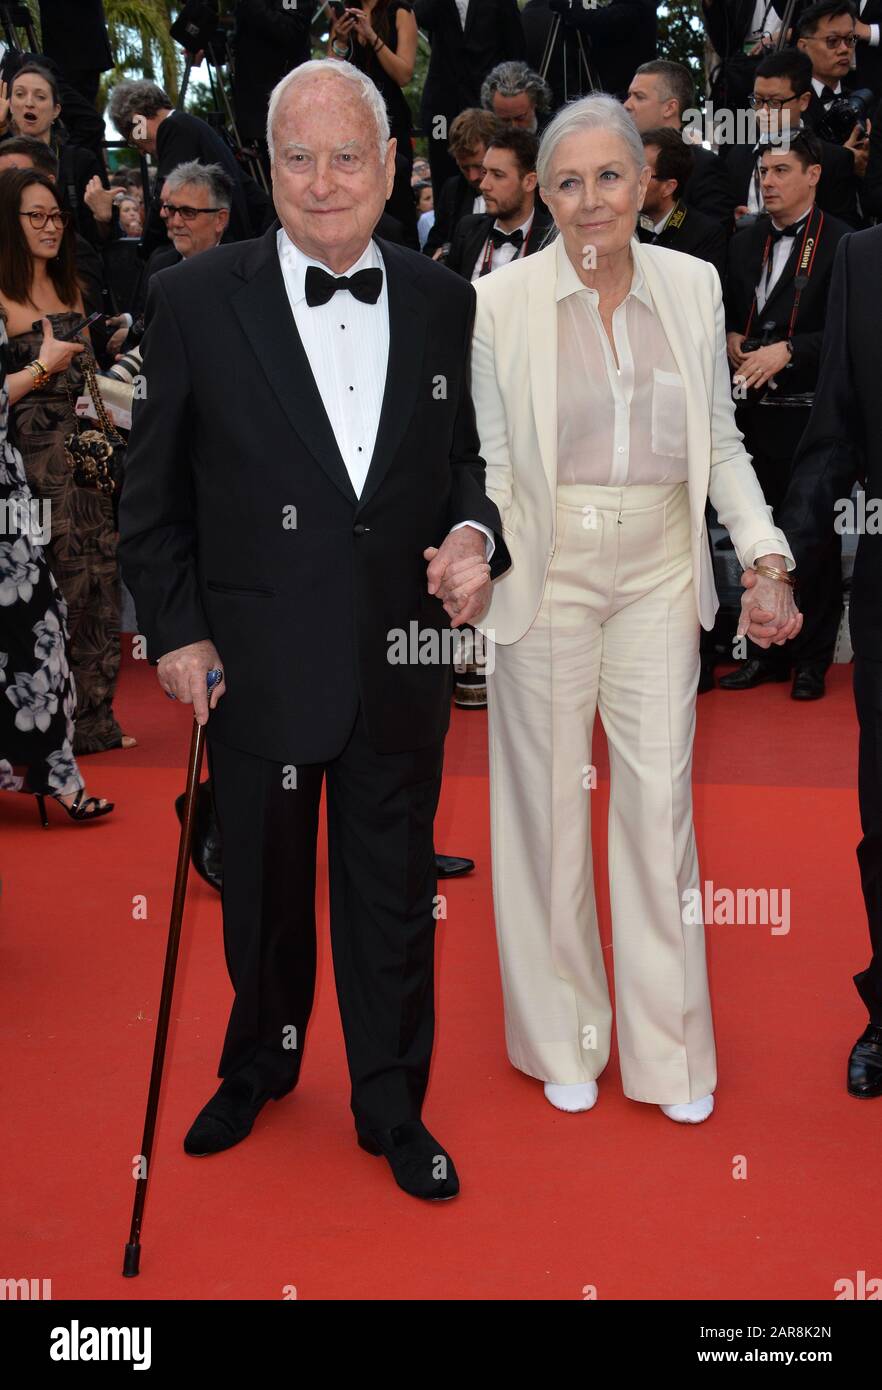 CANNES, FRANCE - MAY 12, 2016: Actress Vanessa Redgrave & director James Ivory at the gala premiere for 'Money Monster' at the 69th Festival de Cannes. Stock Photo